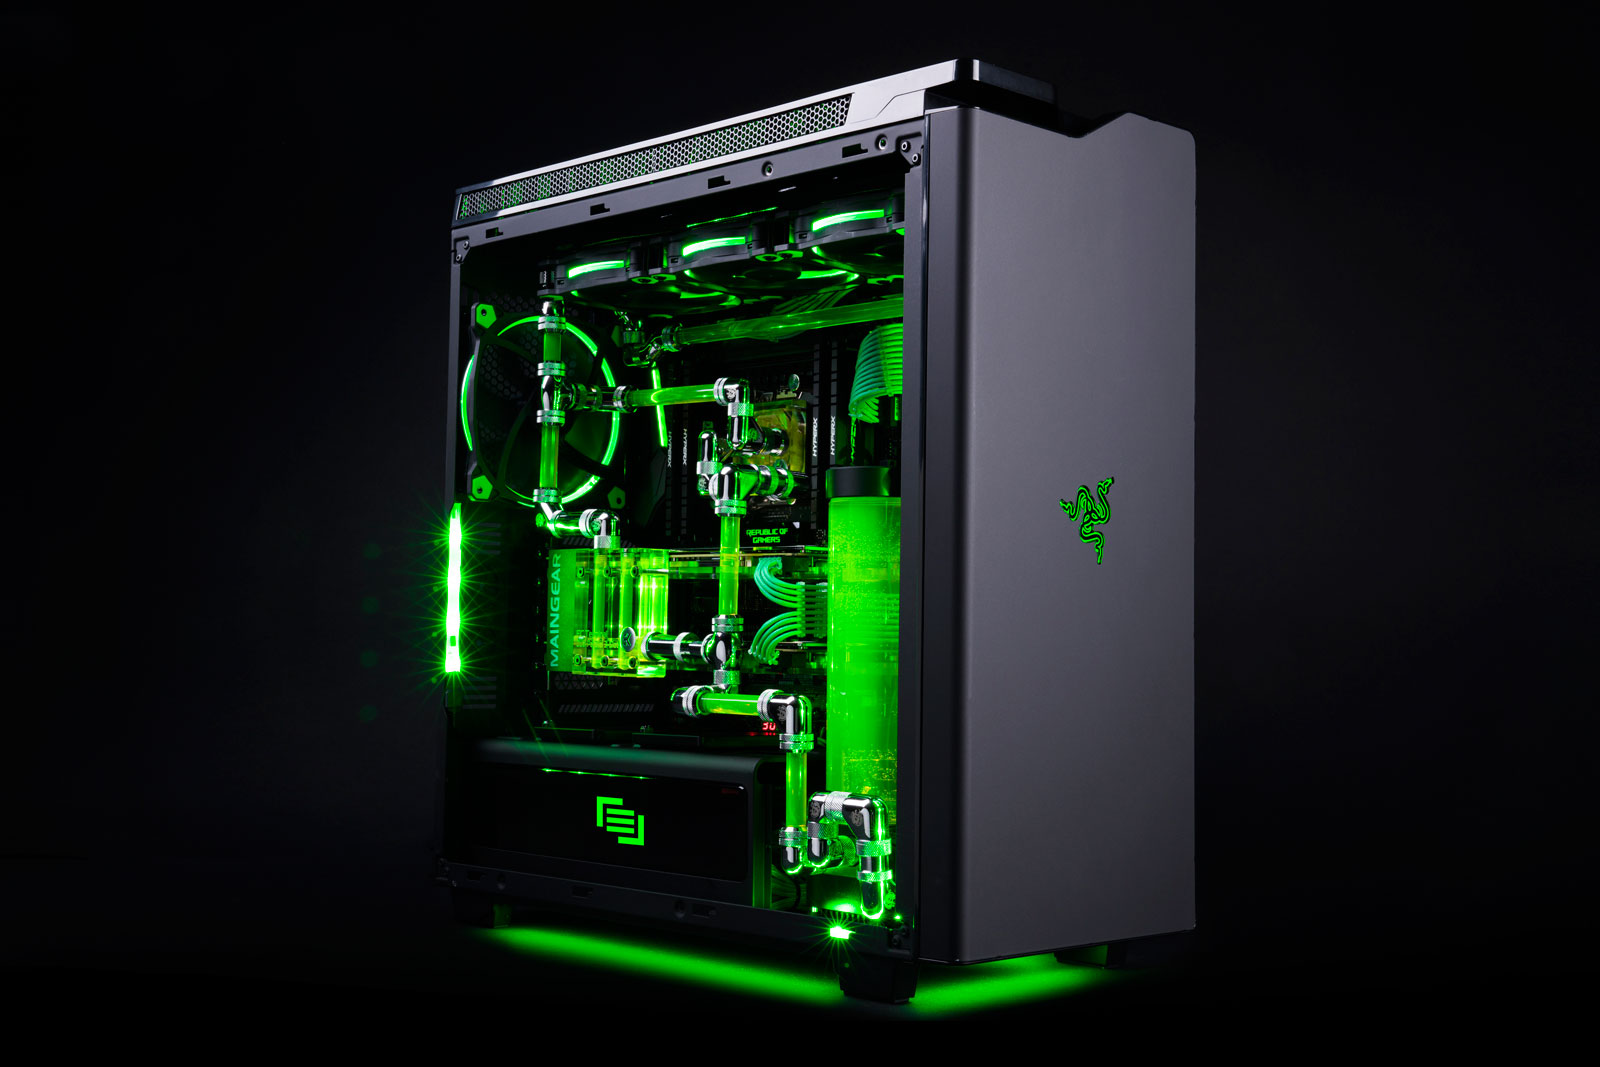 Razer and Maingear partner on an allout gaming PC